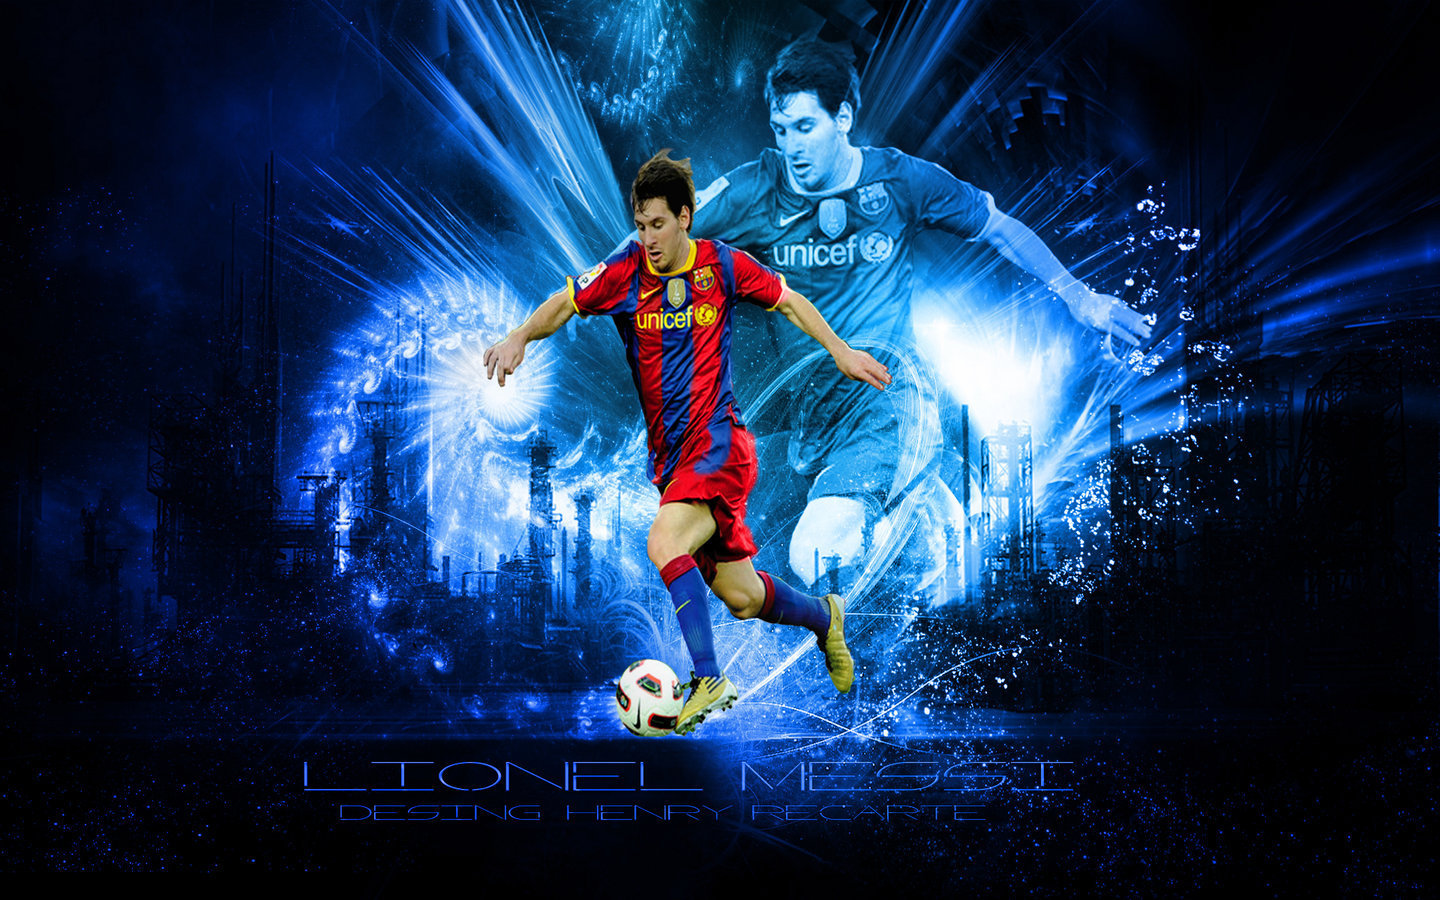 Lionel Messi wallpapers:Image to Wallpaper